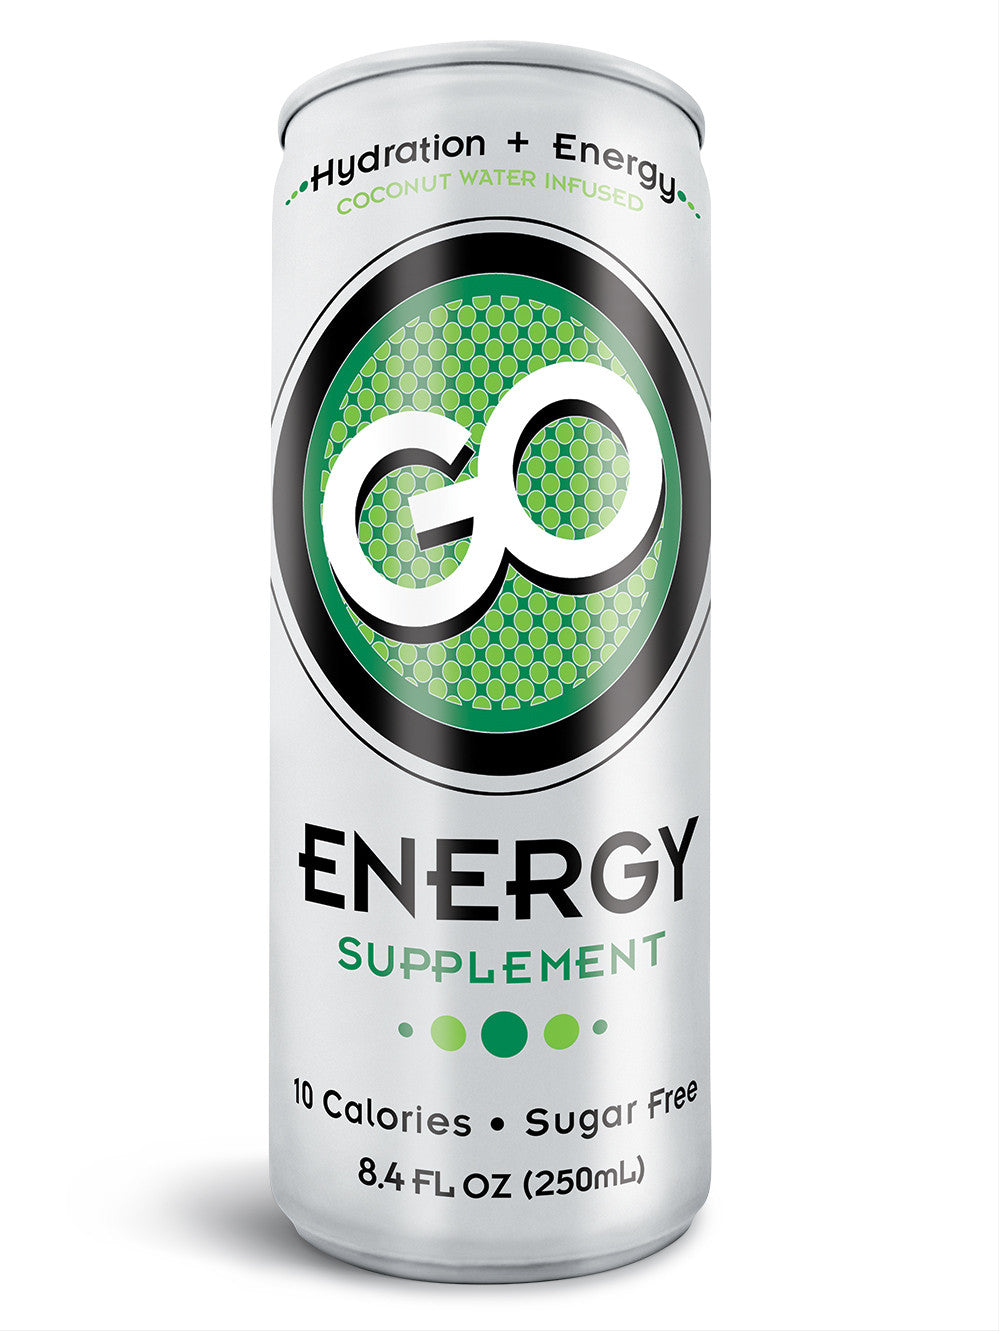 GO Energy - (Qty: 48 cans, 8.4 oz) - FREE SHIPPING